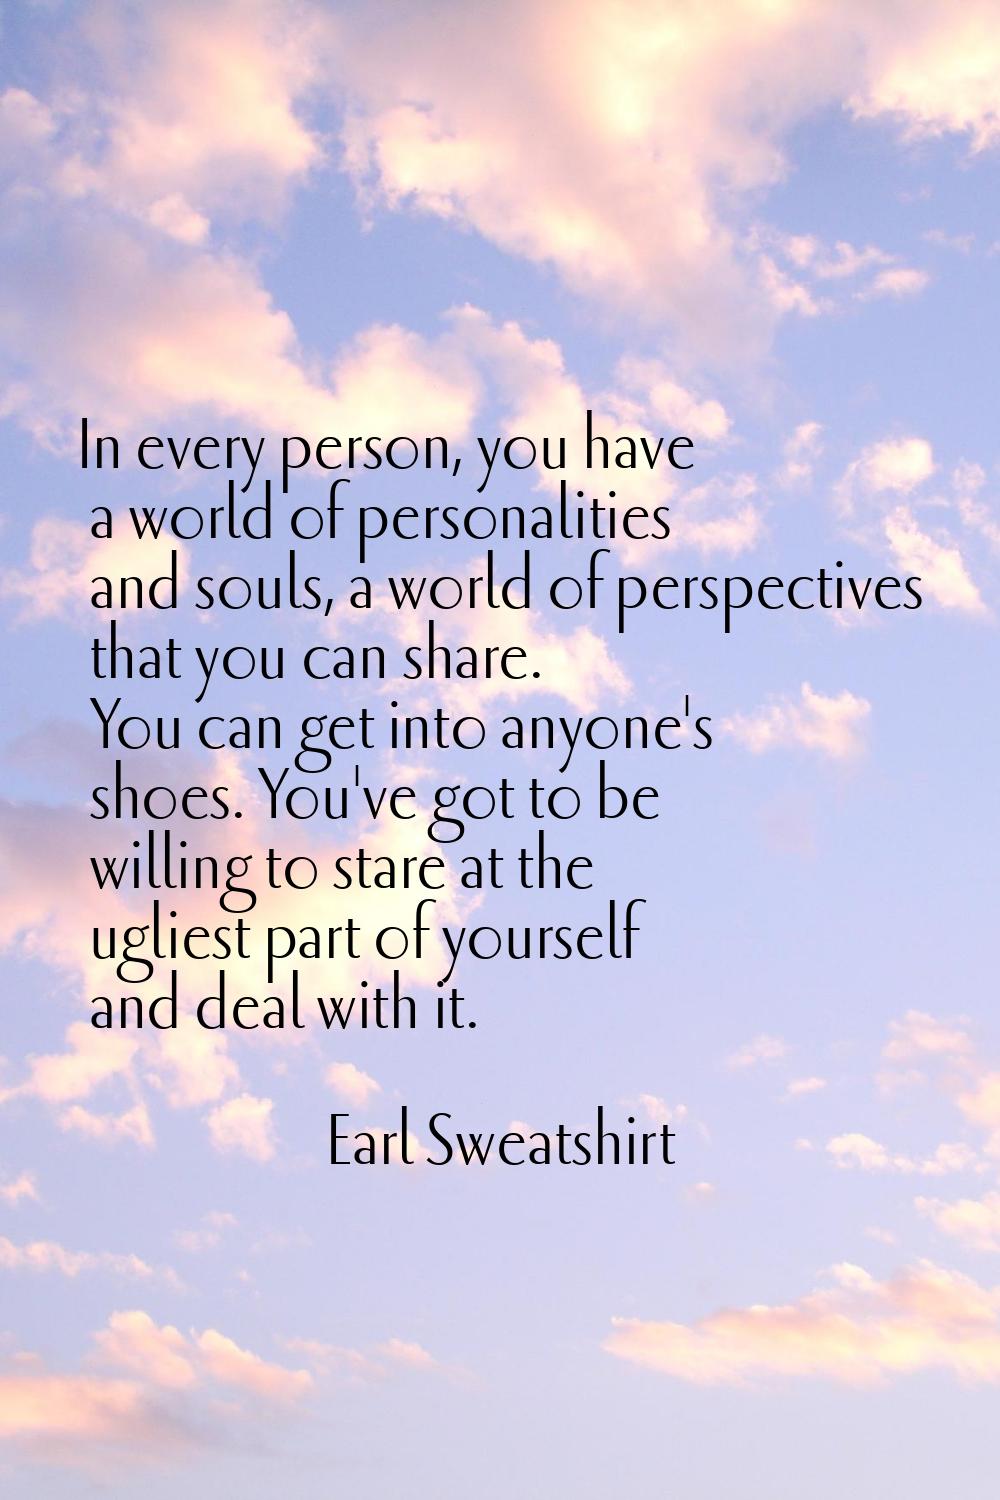 In every person, you have a world of personalities and souls, a world of perspectives that you can 